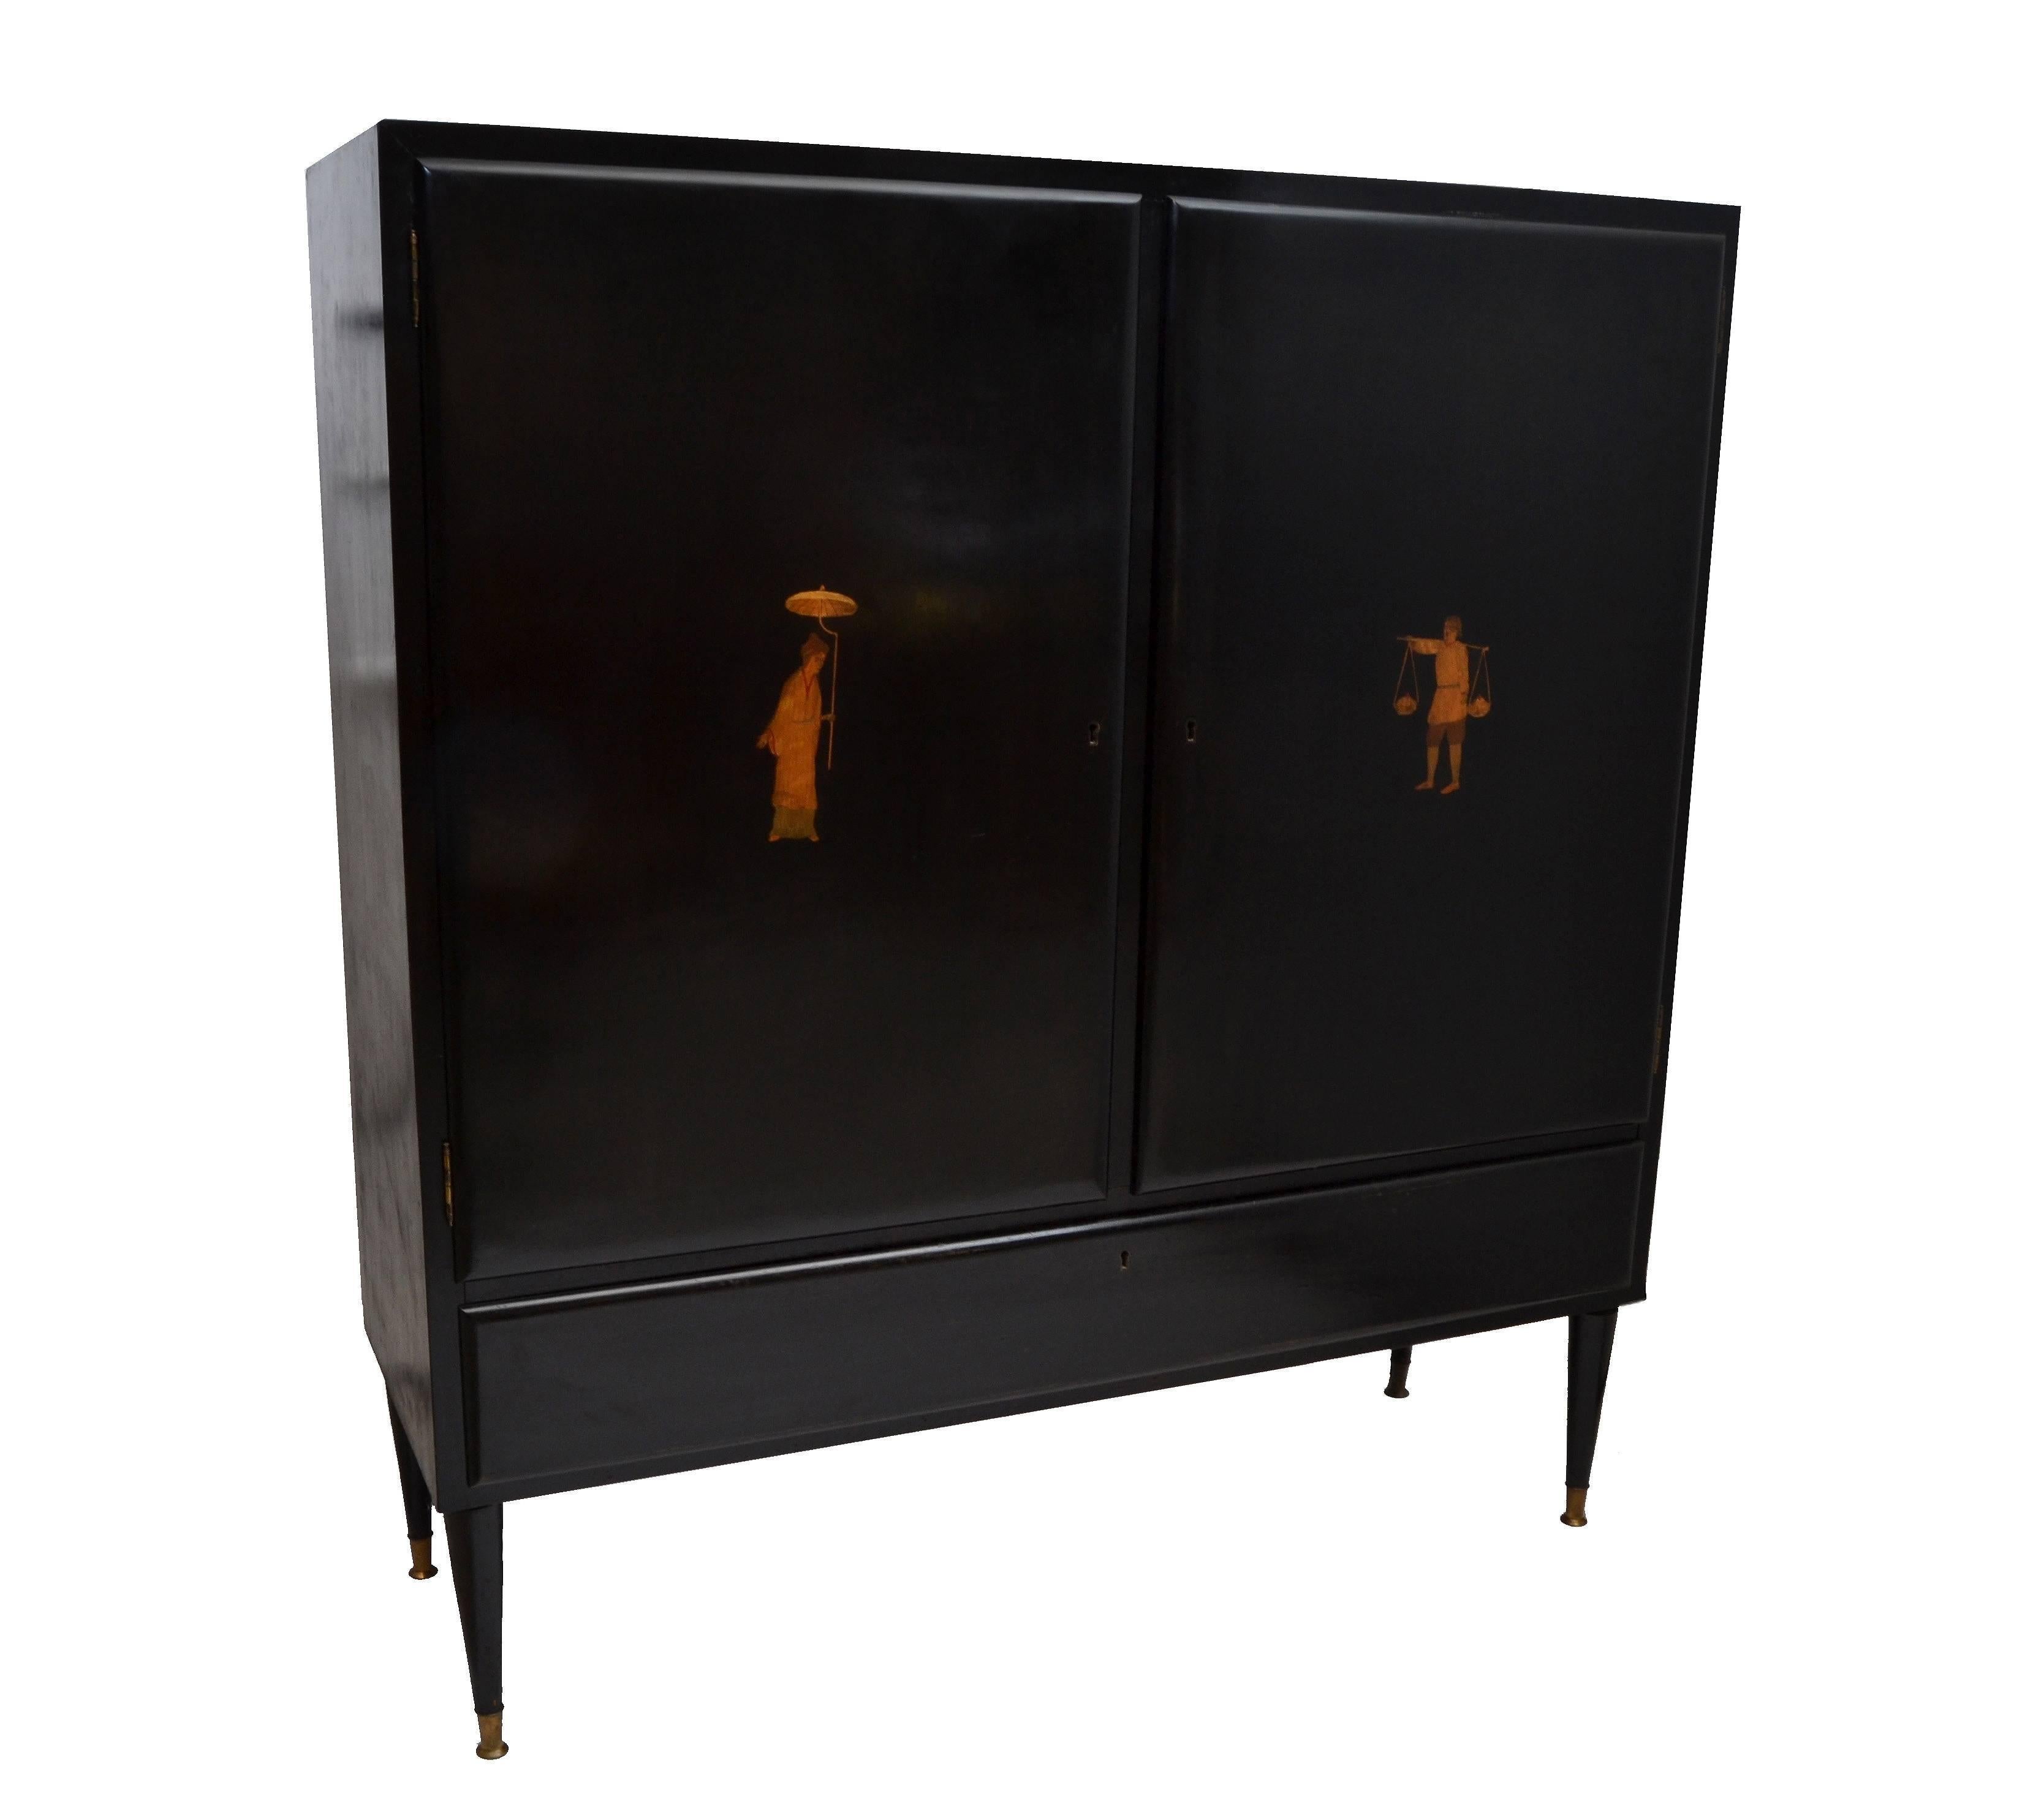 One of a kind wooden cabinet made in Milano, circa 1950 with brass detailed tapered legs.
Ebonized finish, two decorated doors displaying a man as well as a woman in marquetry, has a brass pull.
The interior features four glass shelves and the